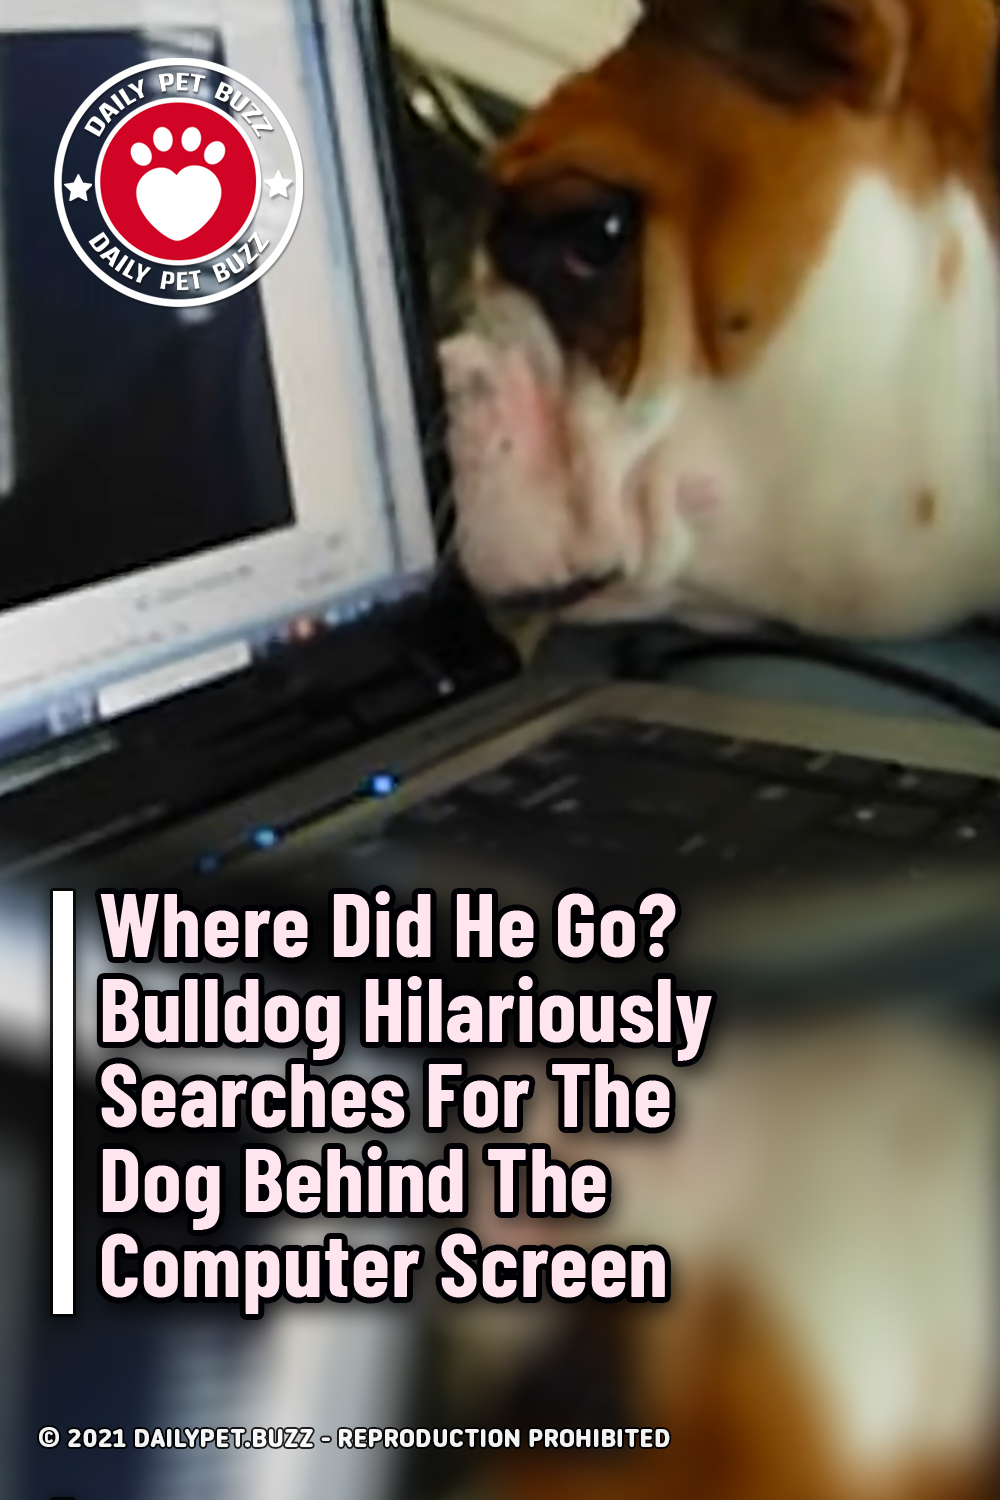 Where Did He Go? Bulldog Hilariously Searches For The Dog Behind The Computer Screen